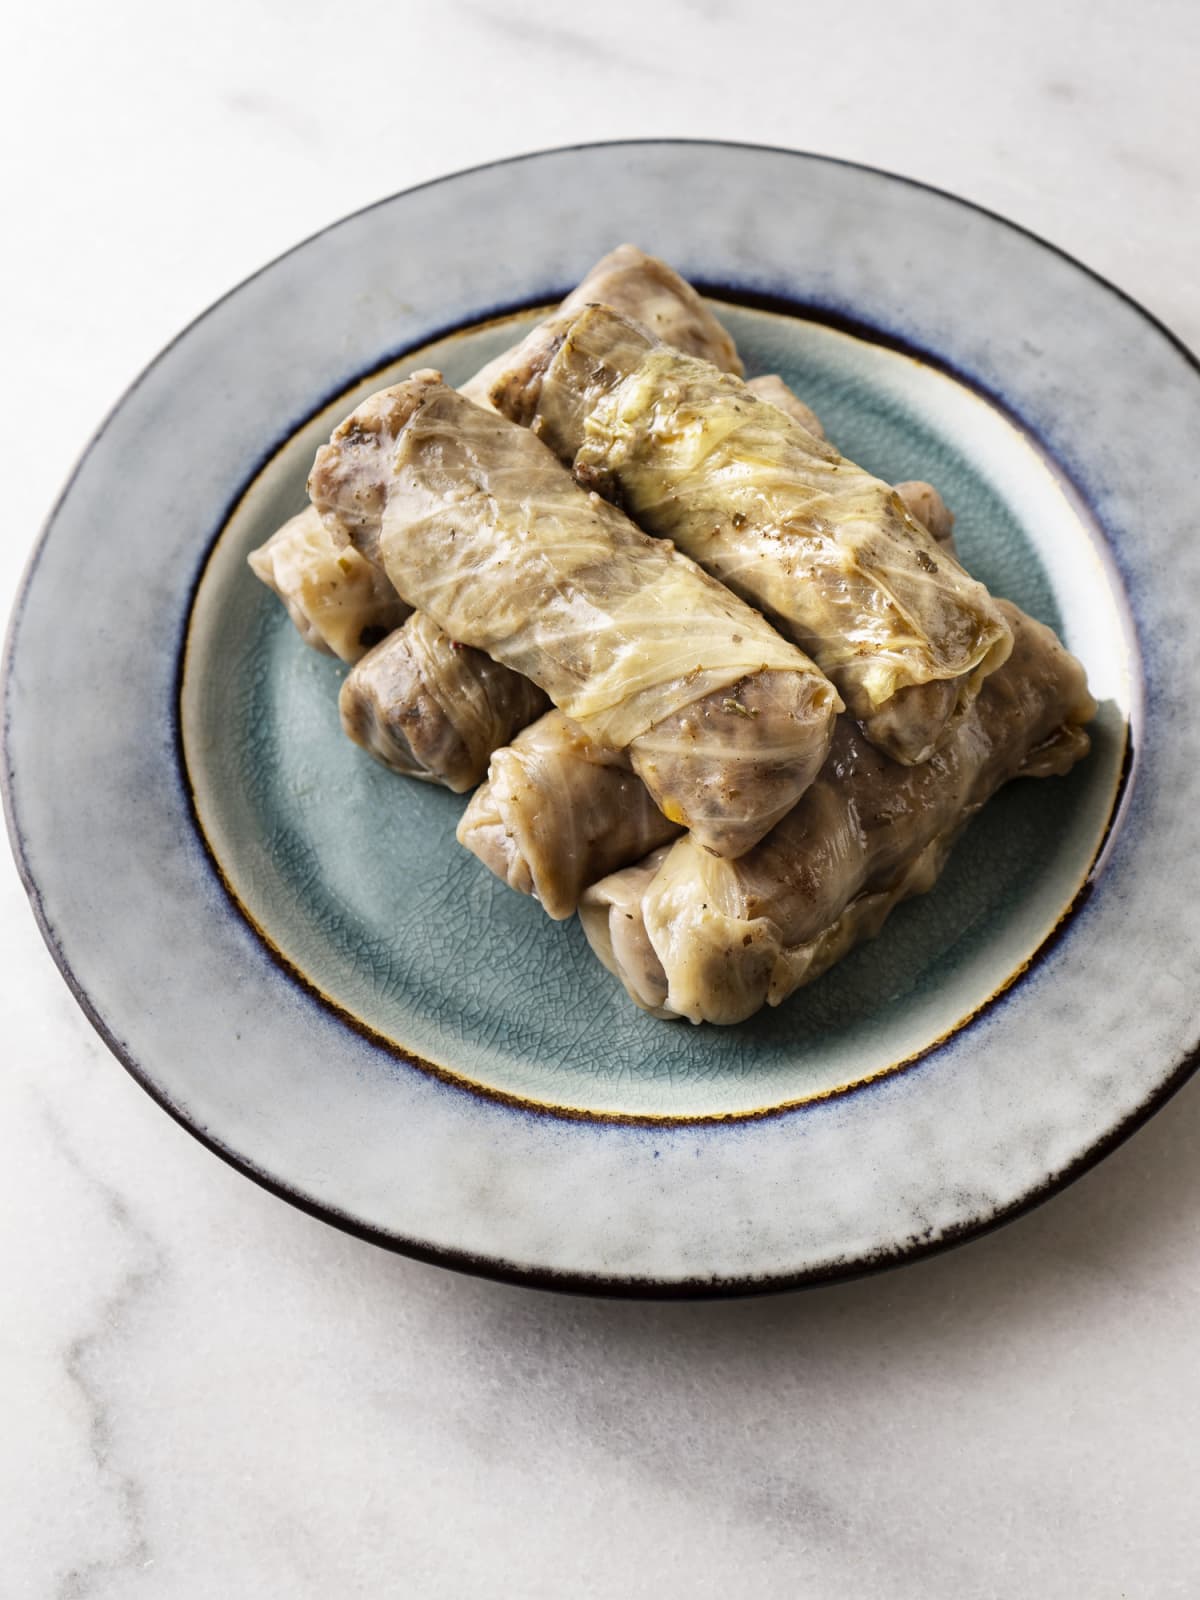 Cabbage, Dolmades, Wrapped, Food and drink, Stuffed, Appetizer, Cabbage, Rolling, Wrapping, Dolma